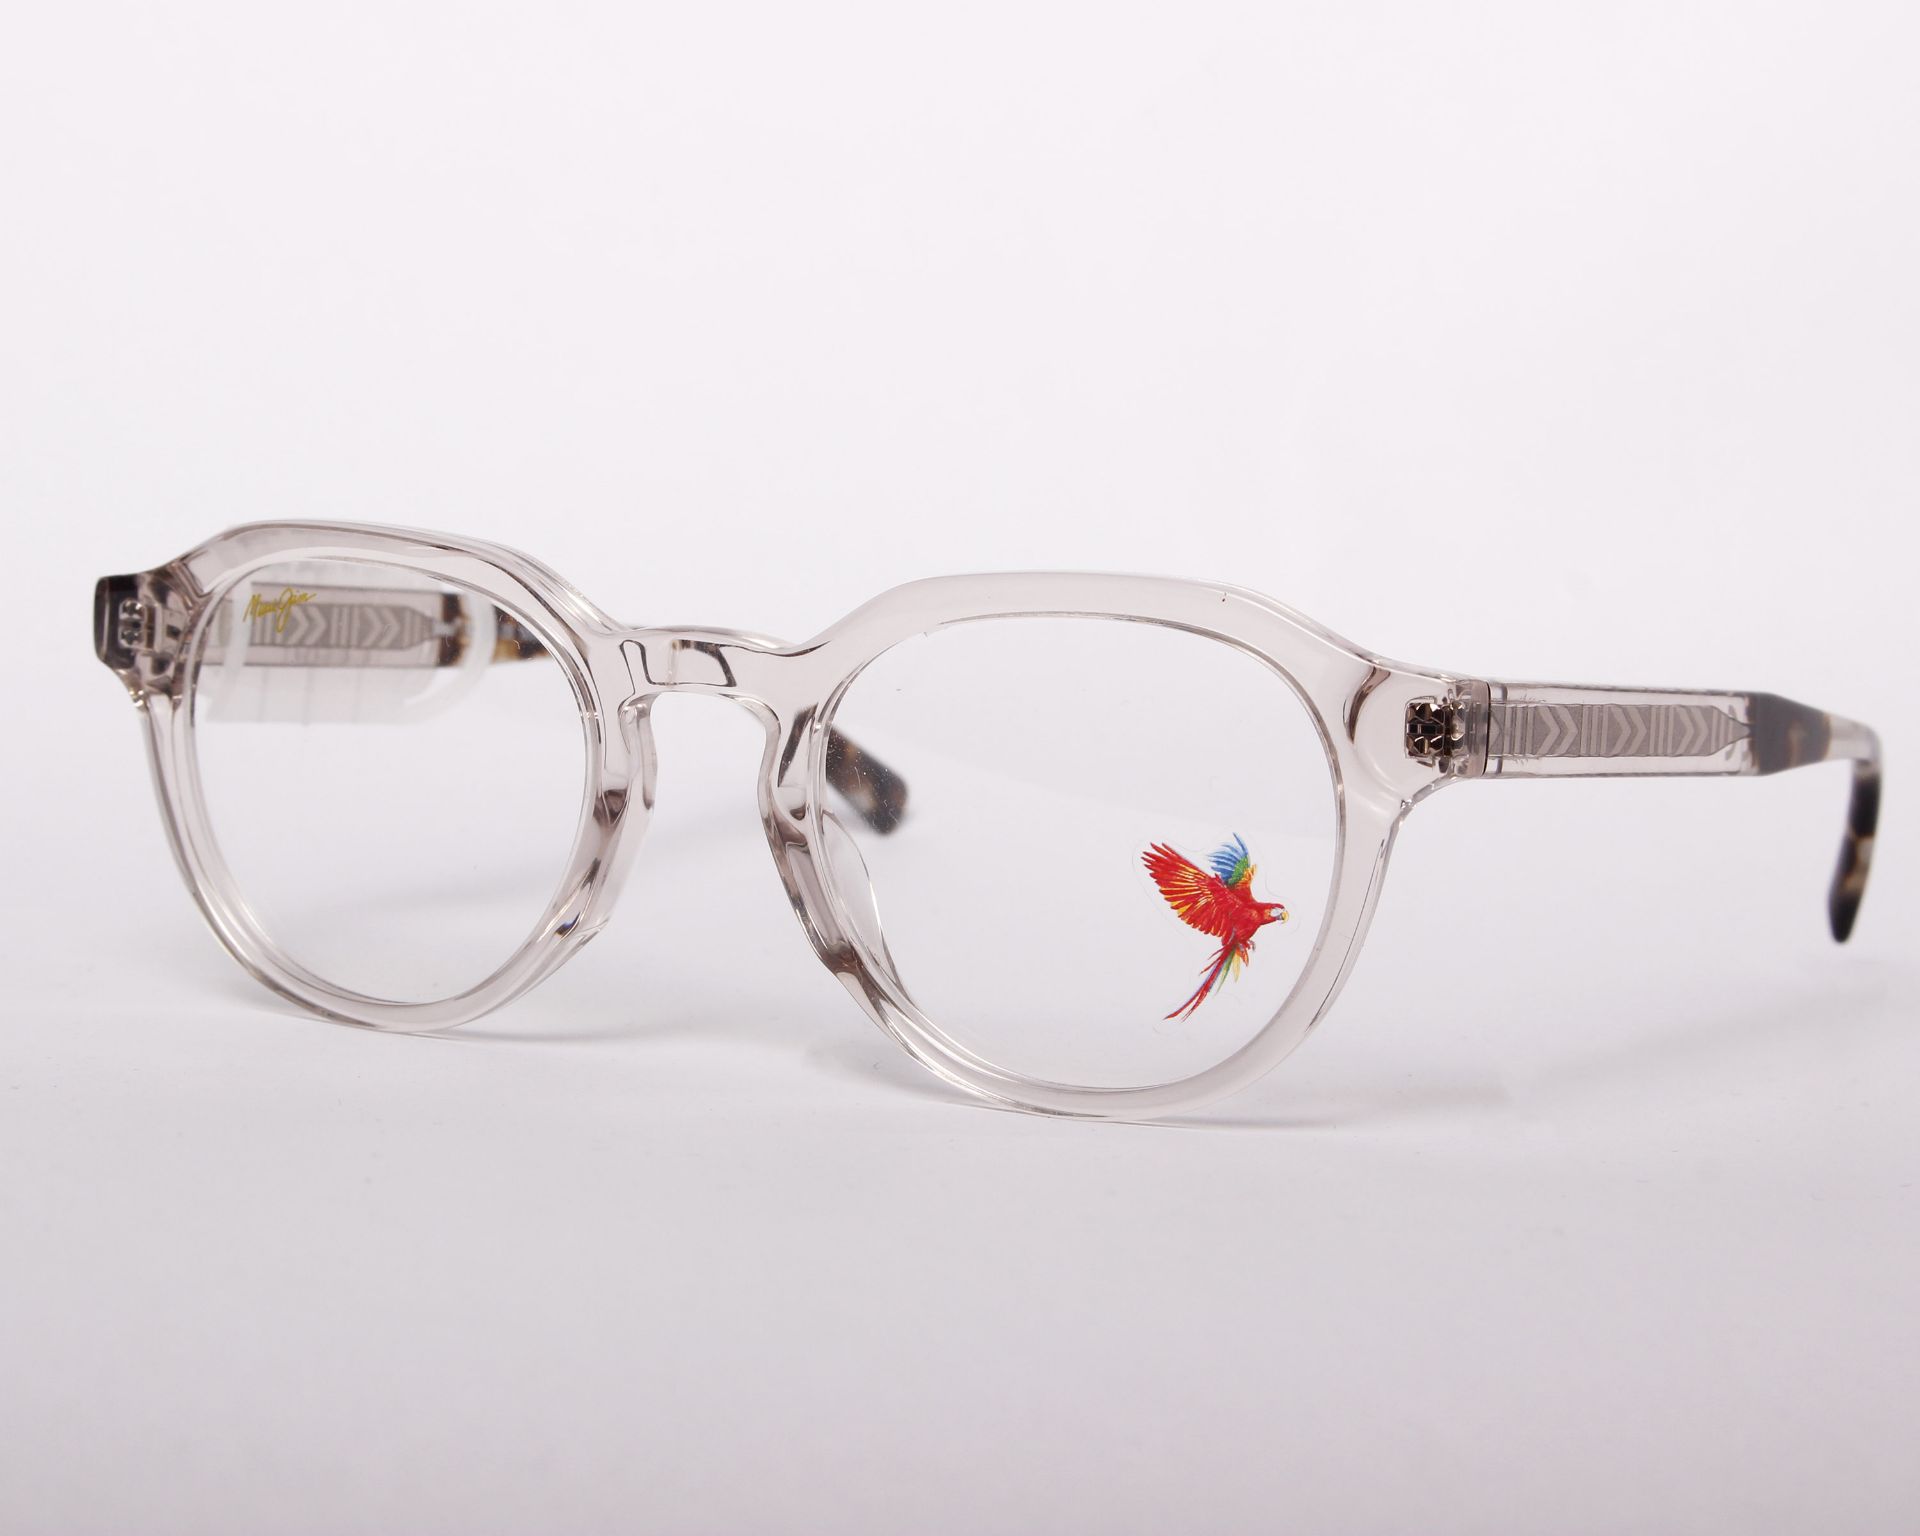 A pair of as new Maui Jim glasses frames with clear glass (RRP £250). - Image 3 of 3